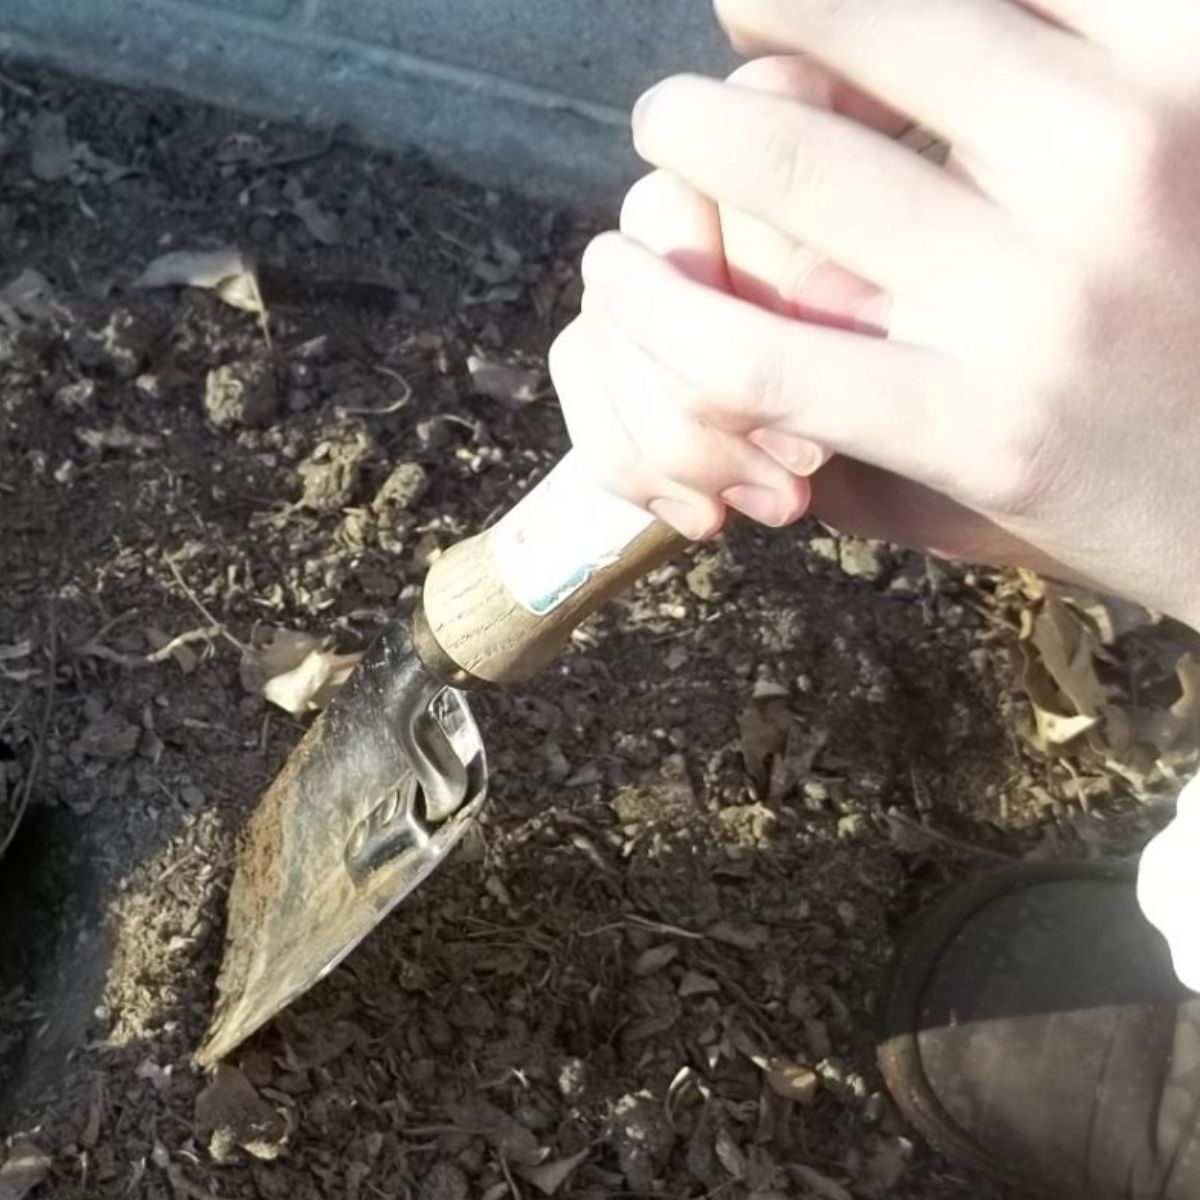 A gardener with a small shovel cuts the soil.